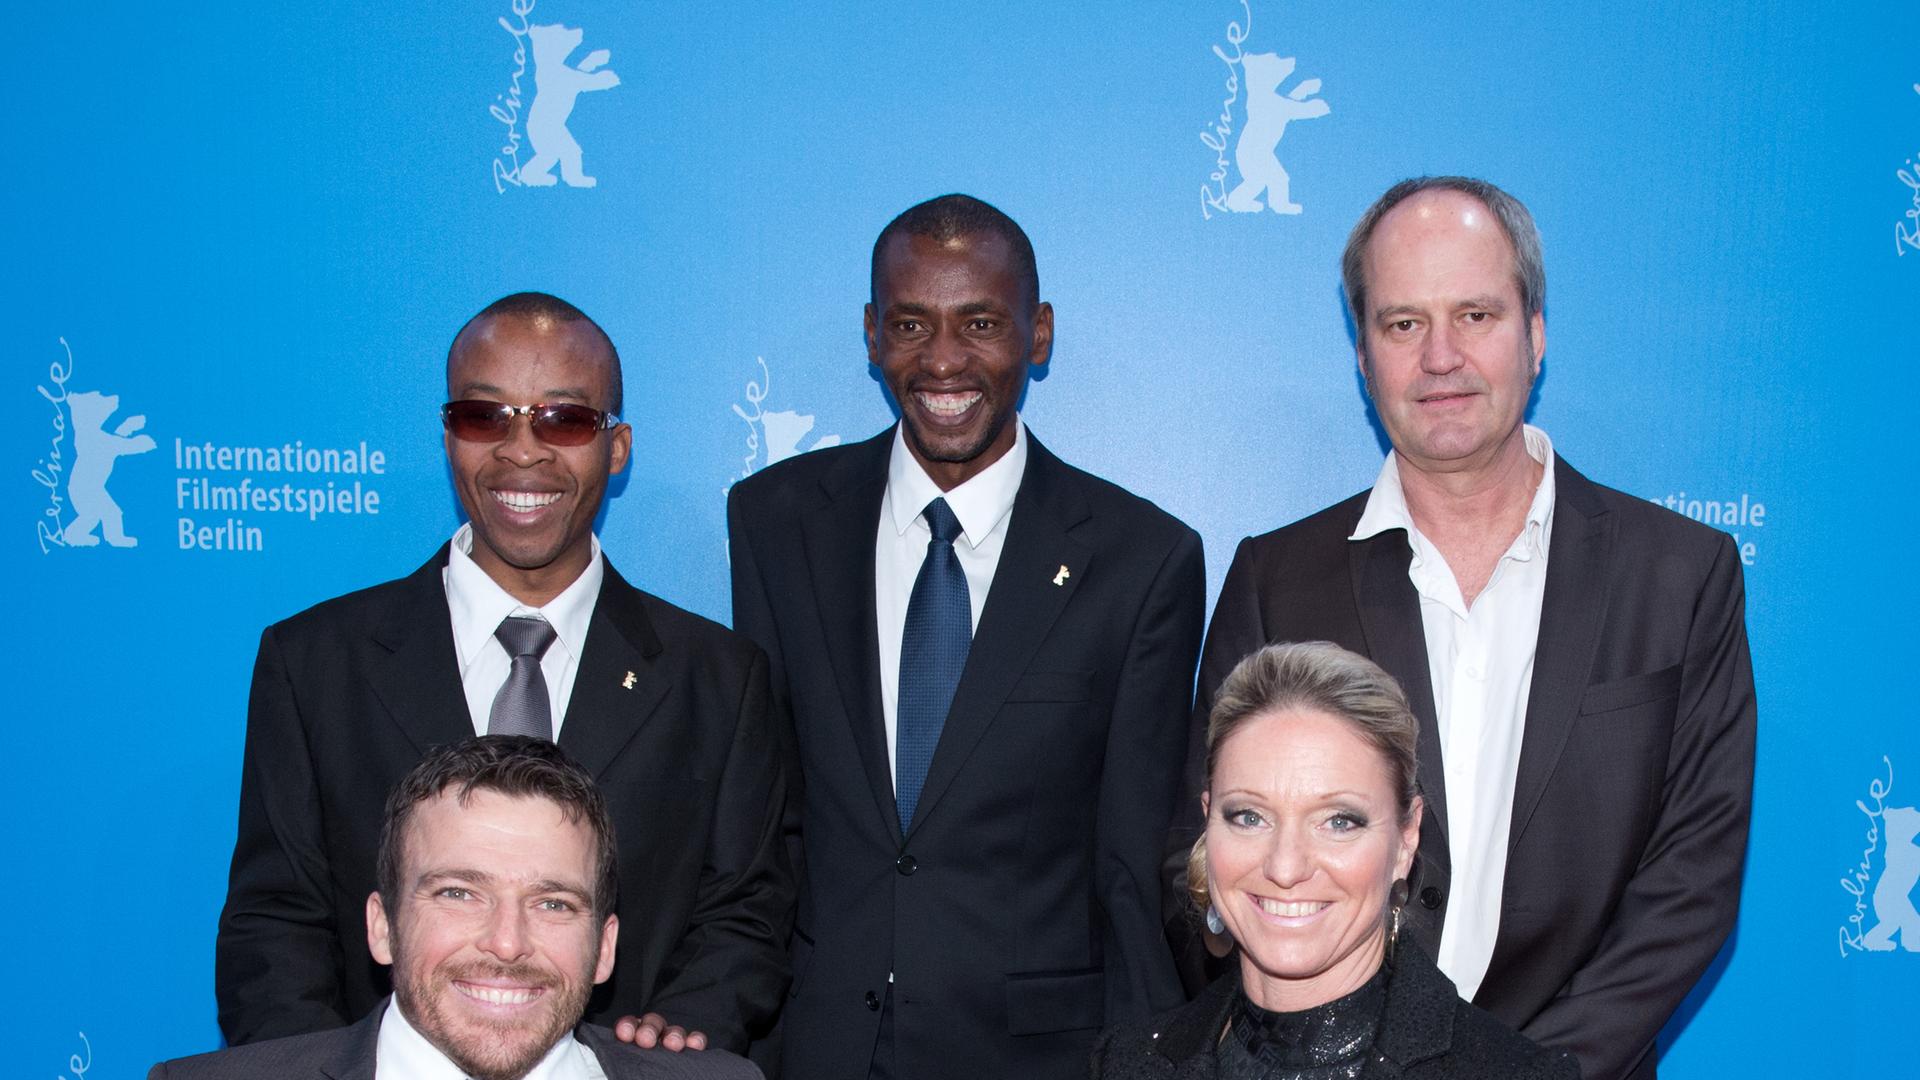 The athletes Kurt Fearnley (Australia, L-R), Henry Wanyoike (Kenya), Joseph Kibunya (Kenya), Kirsten Bruhn (Germany) and South African director Michael Hammon arrive for the premiere of the movie 'Gold - You Can Do More Than You Think' ('Gold - Du kannst 